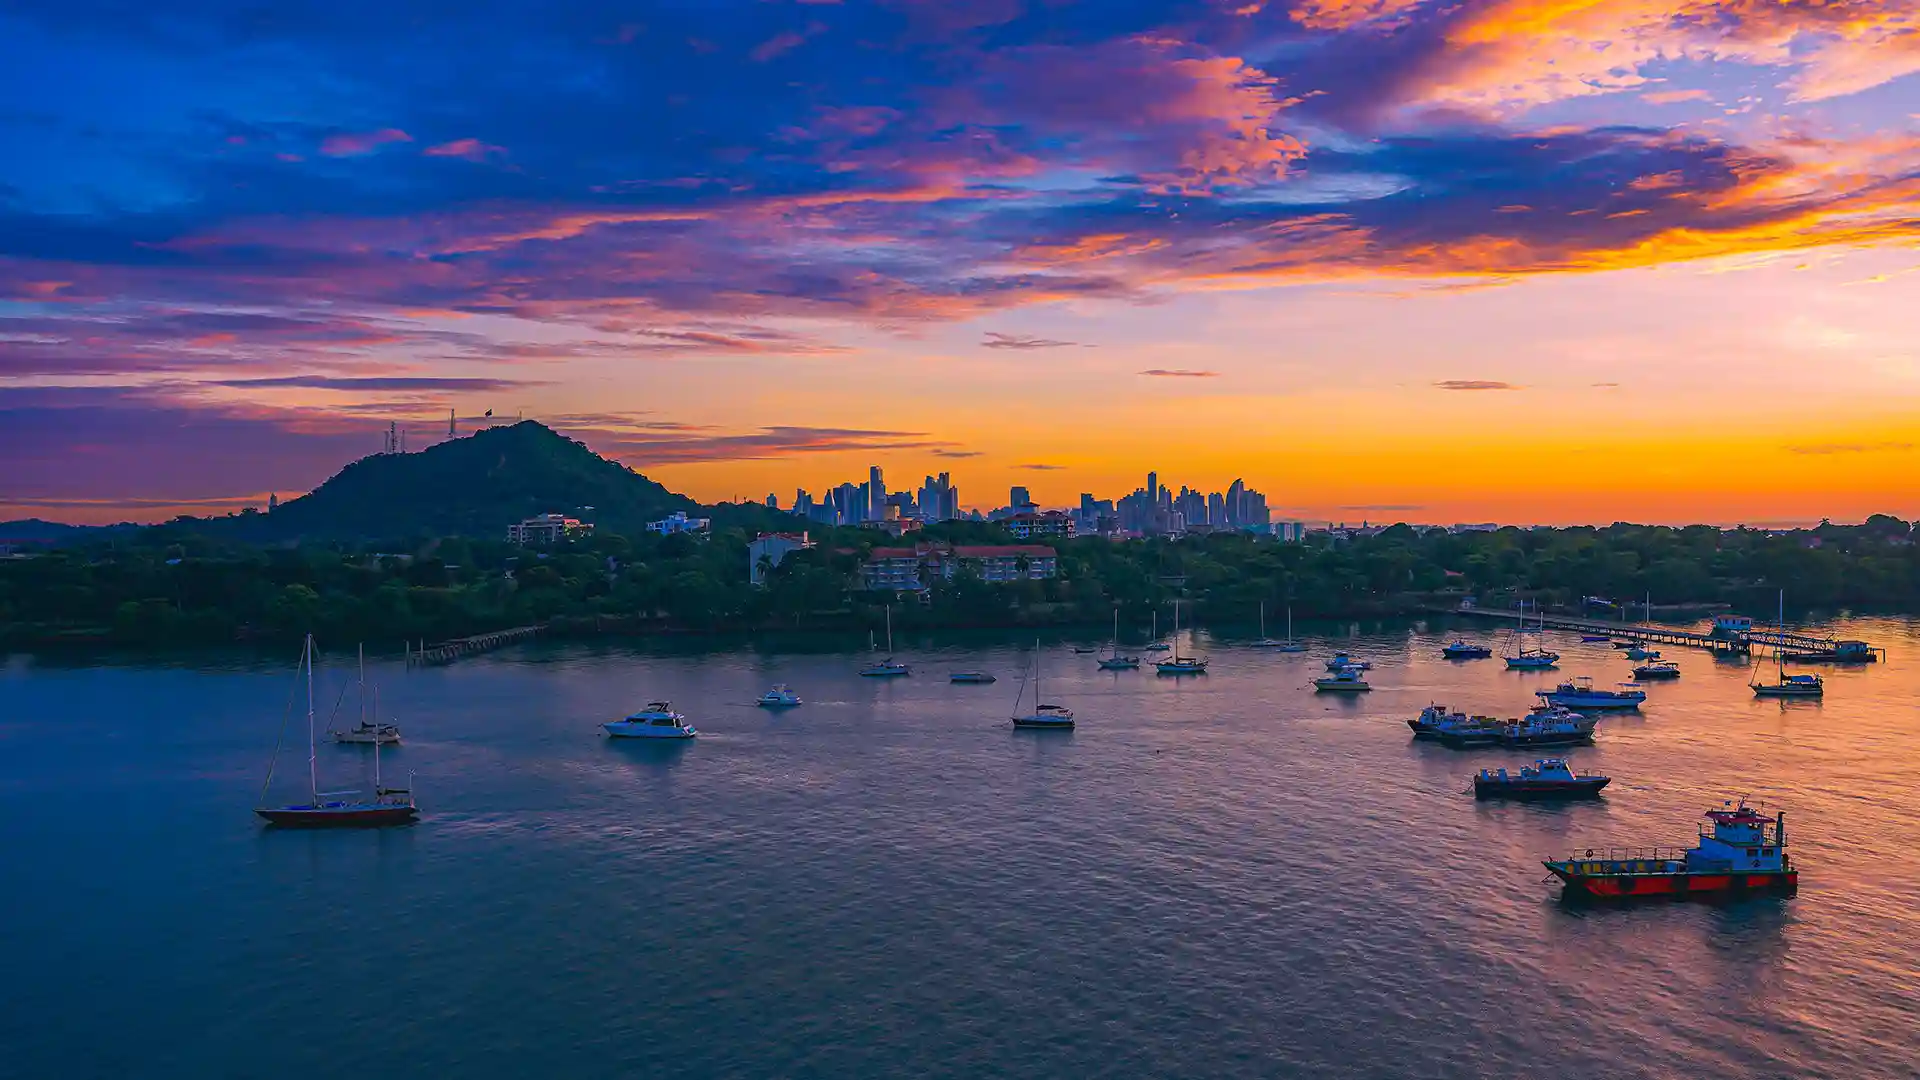 View of a sunrise over Panama where boats float on glistening water reflecting orange hues.